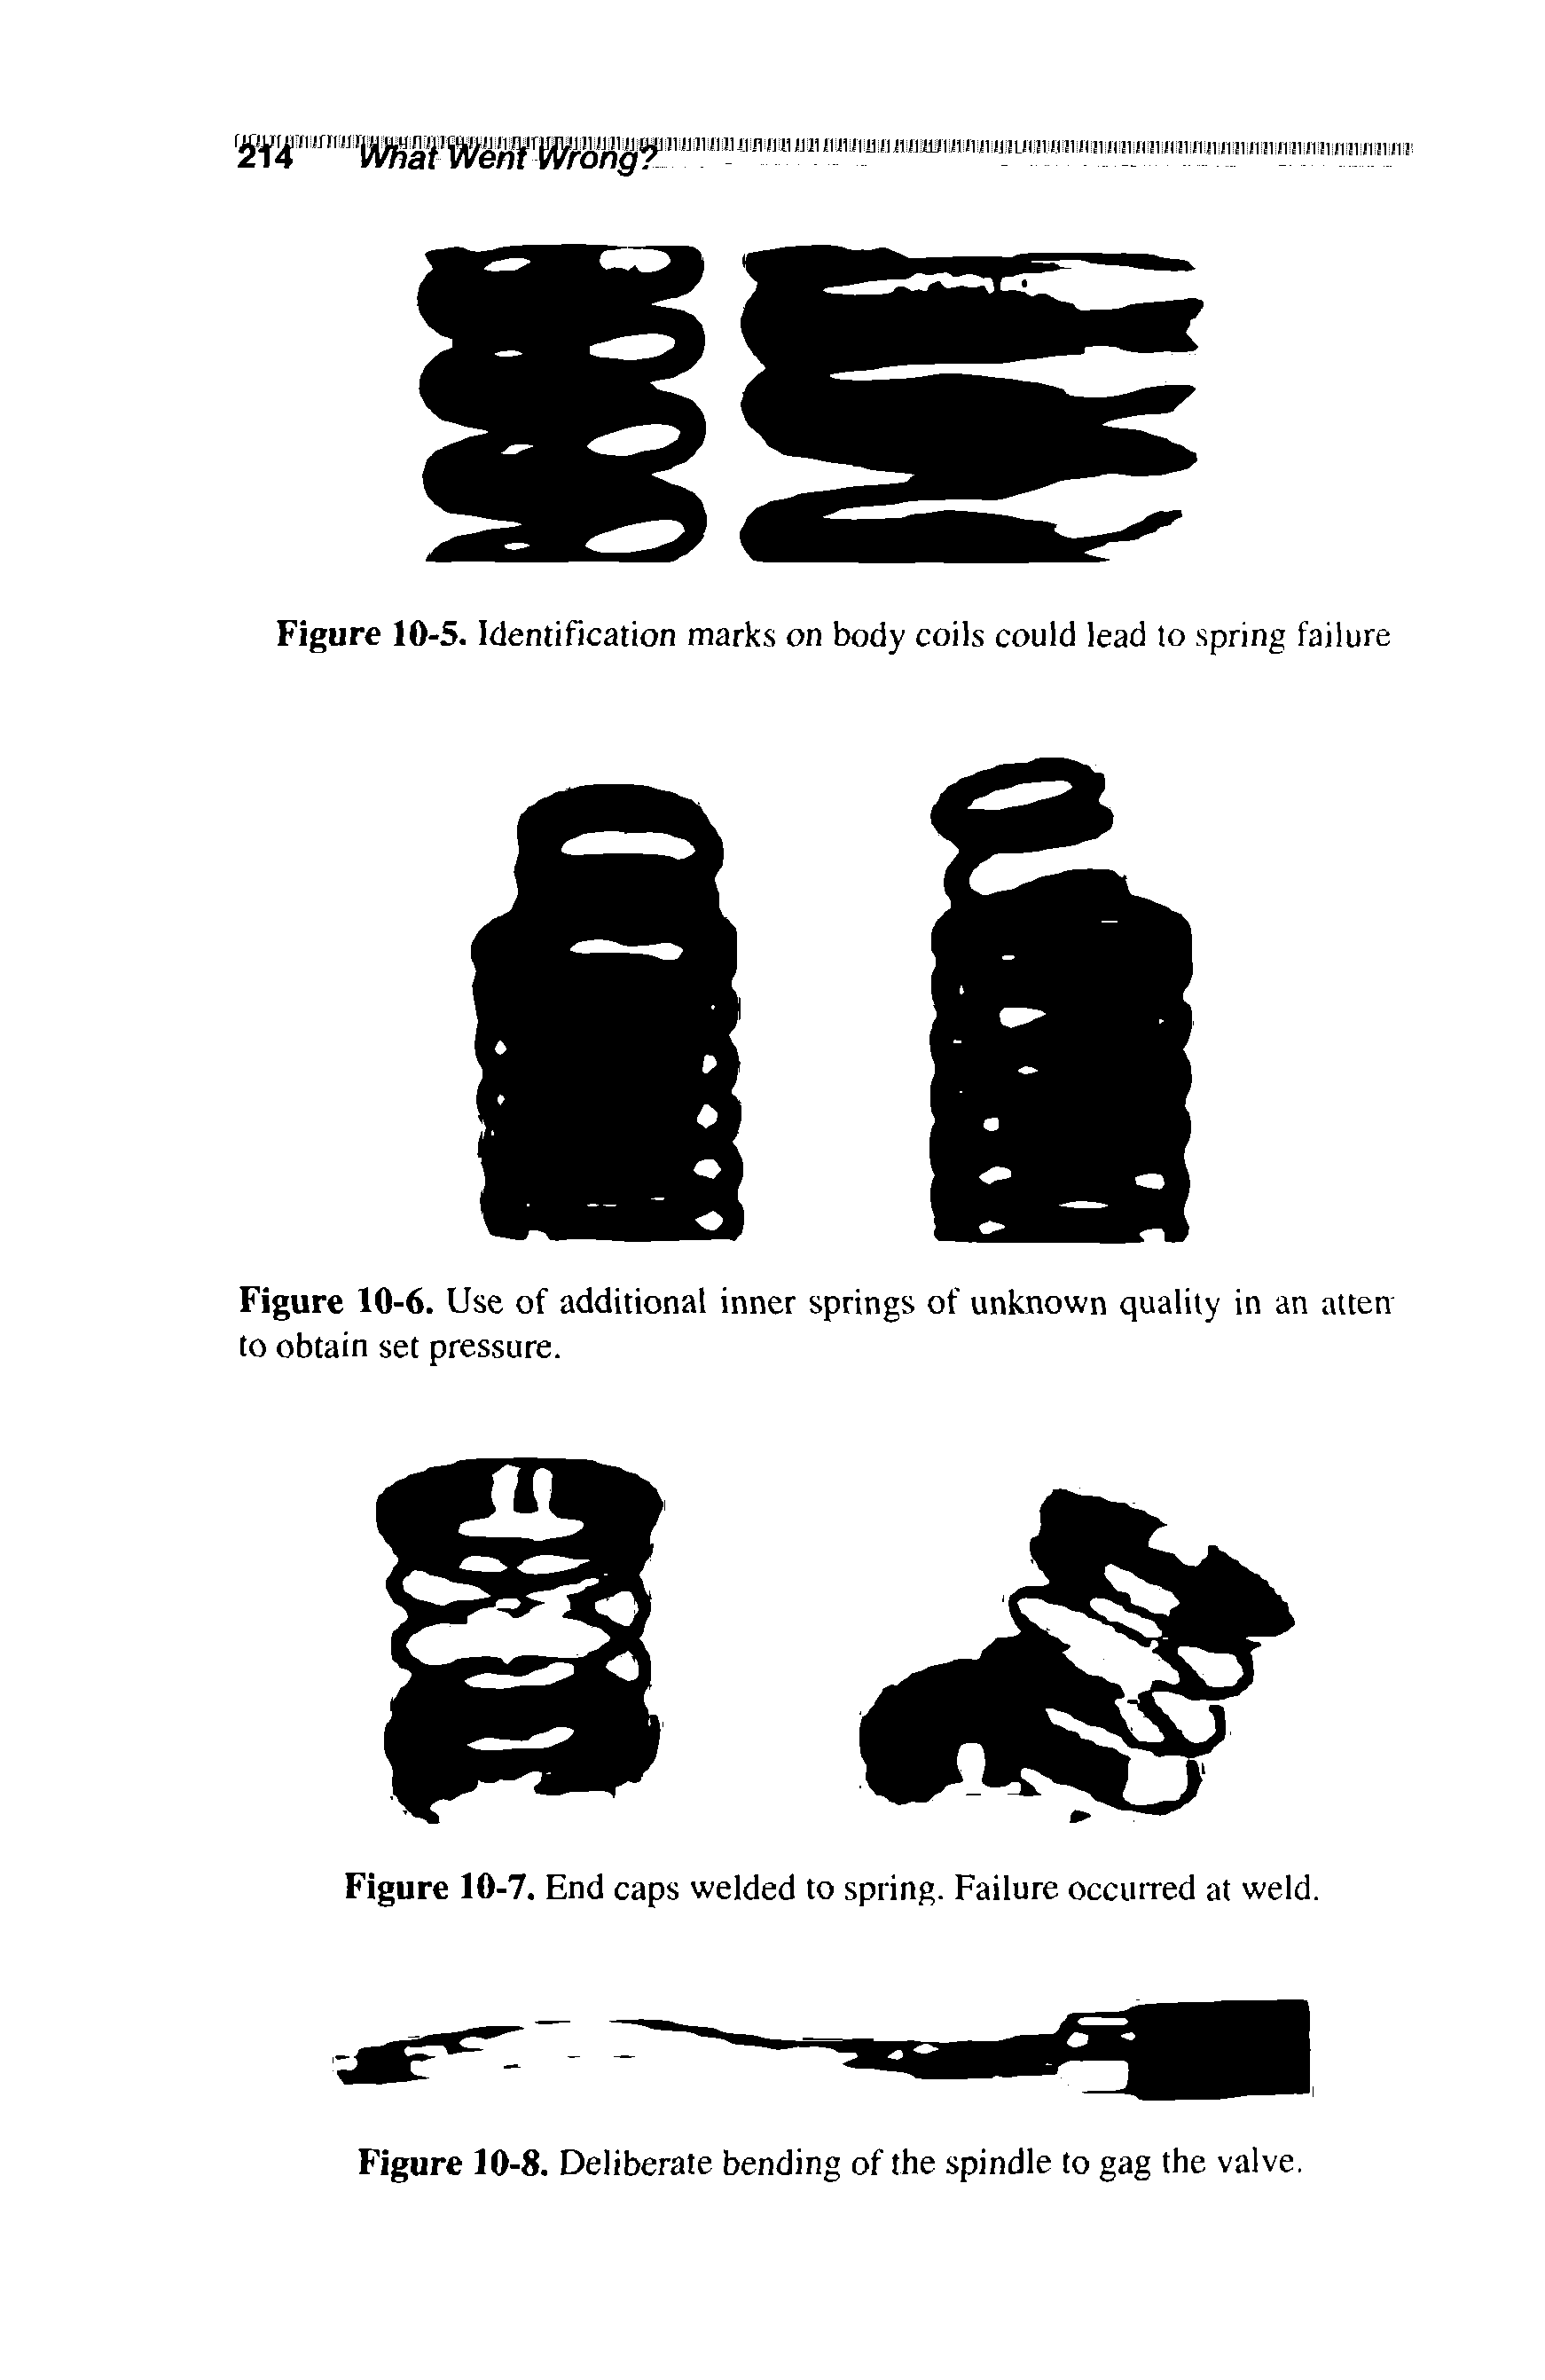 Figure 10-6. Use of additional inner springs of unknown quality in an atten to obtain set pressure.